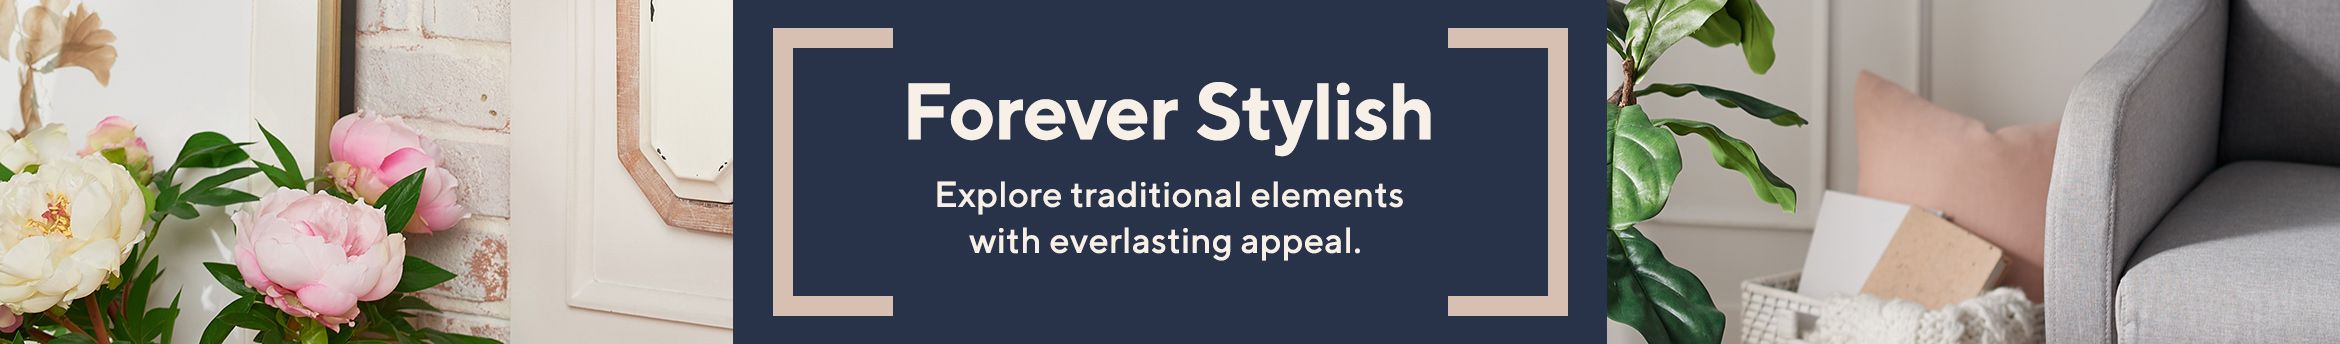 Forever Stylish.  Explore traditional elements with everlasting appeal.